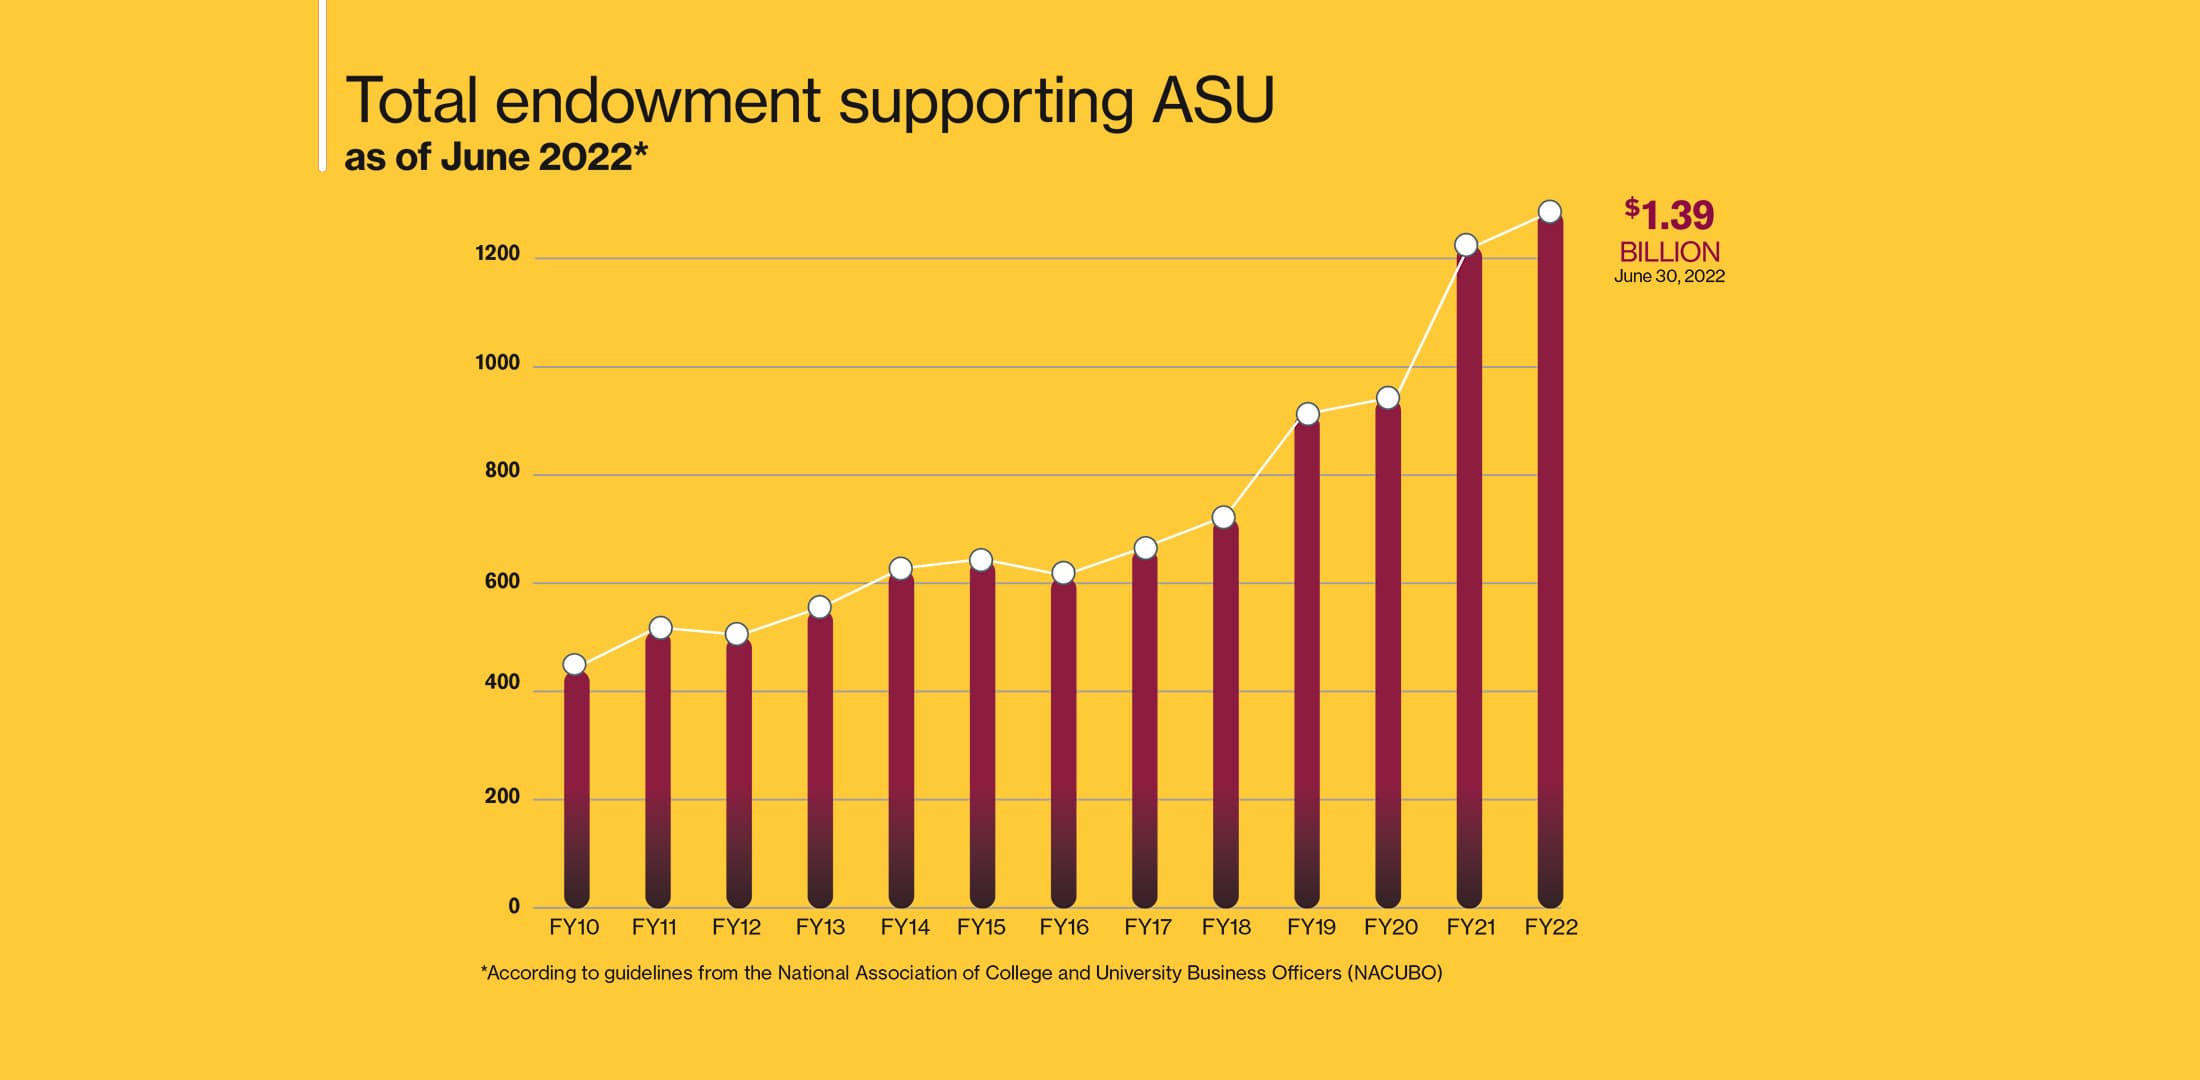 Total endowment supporting ASU as of June 2022.